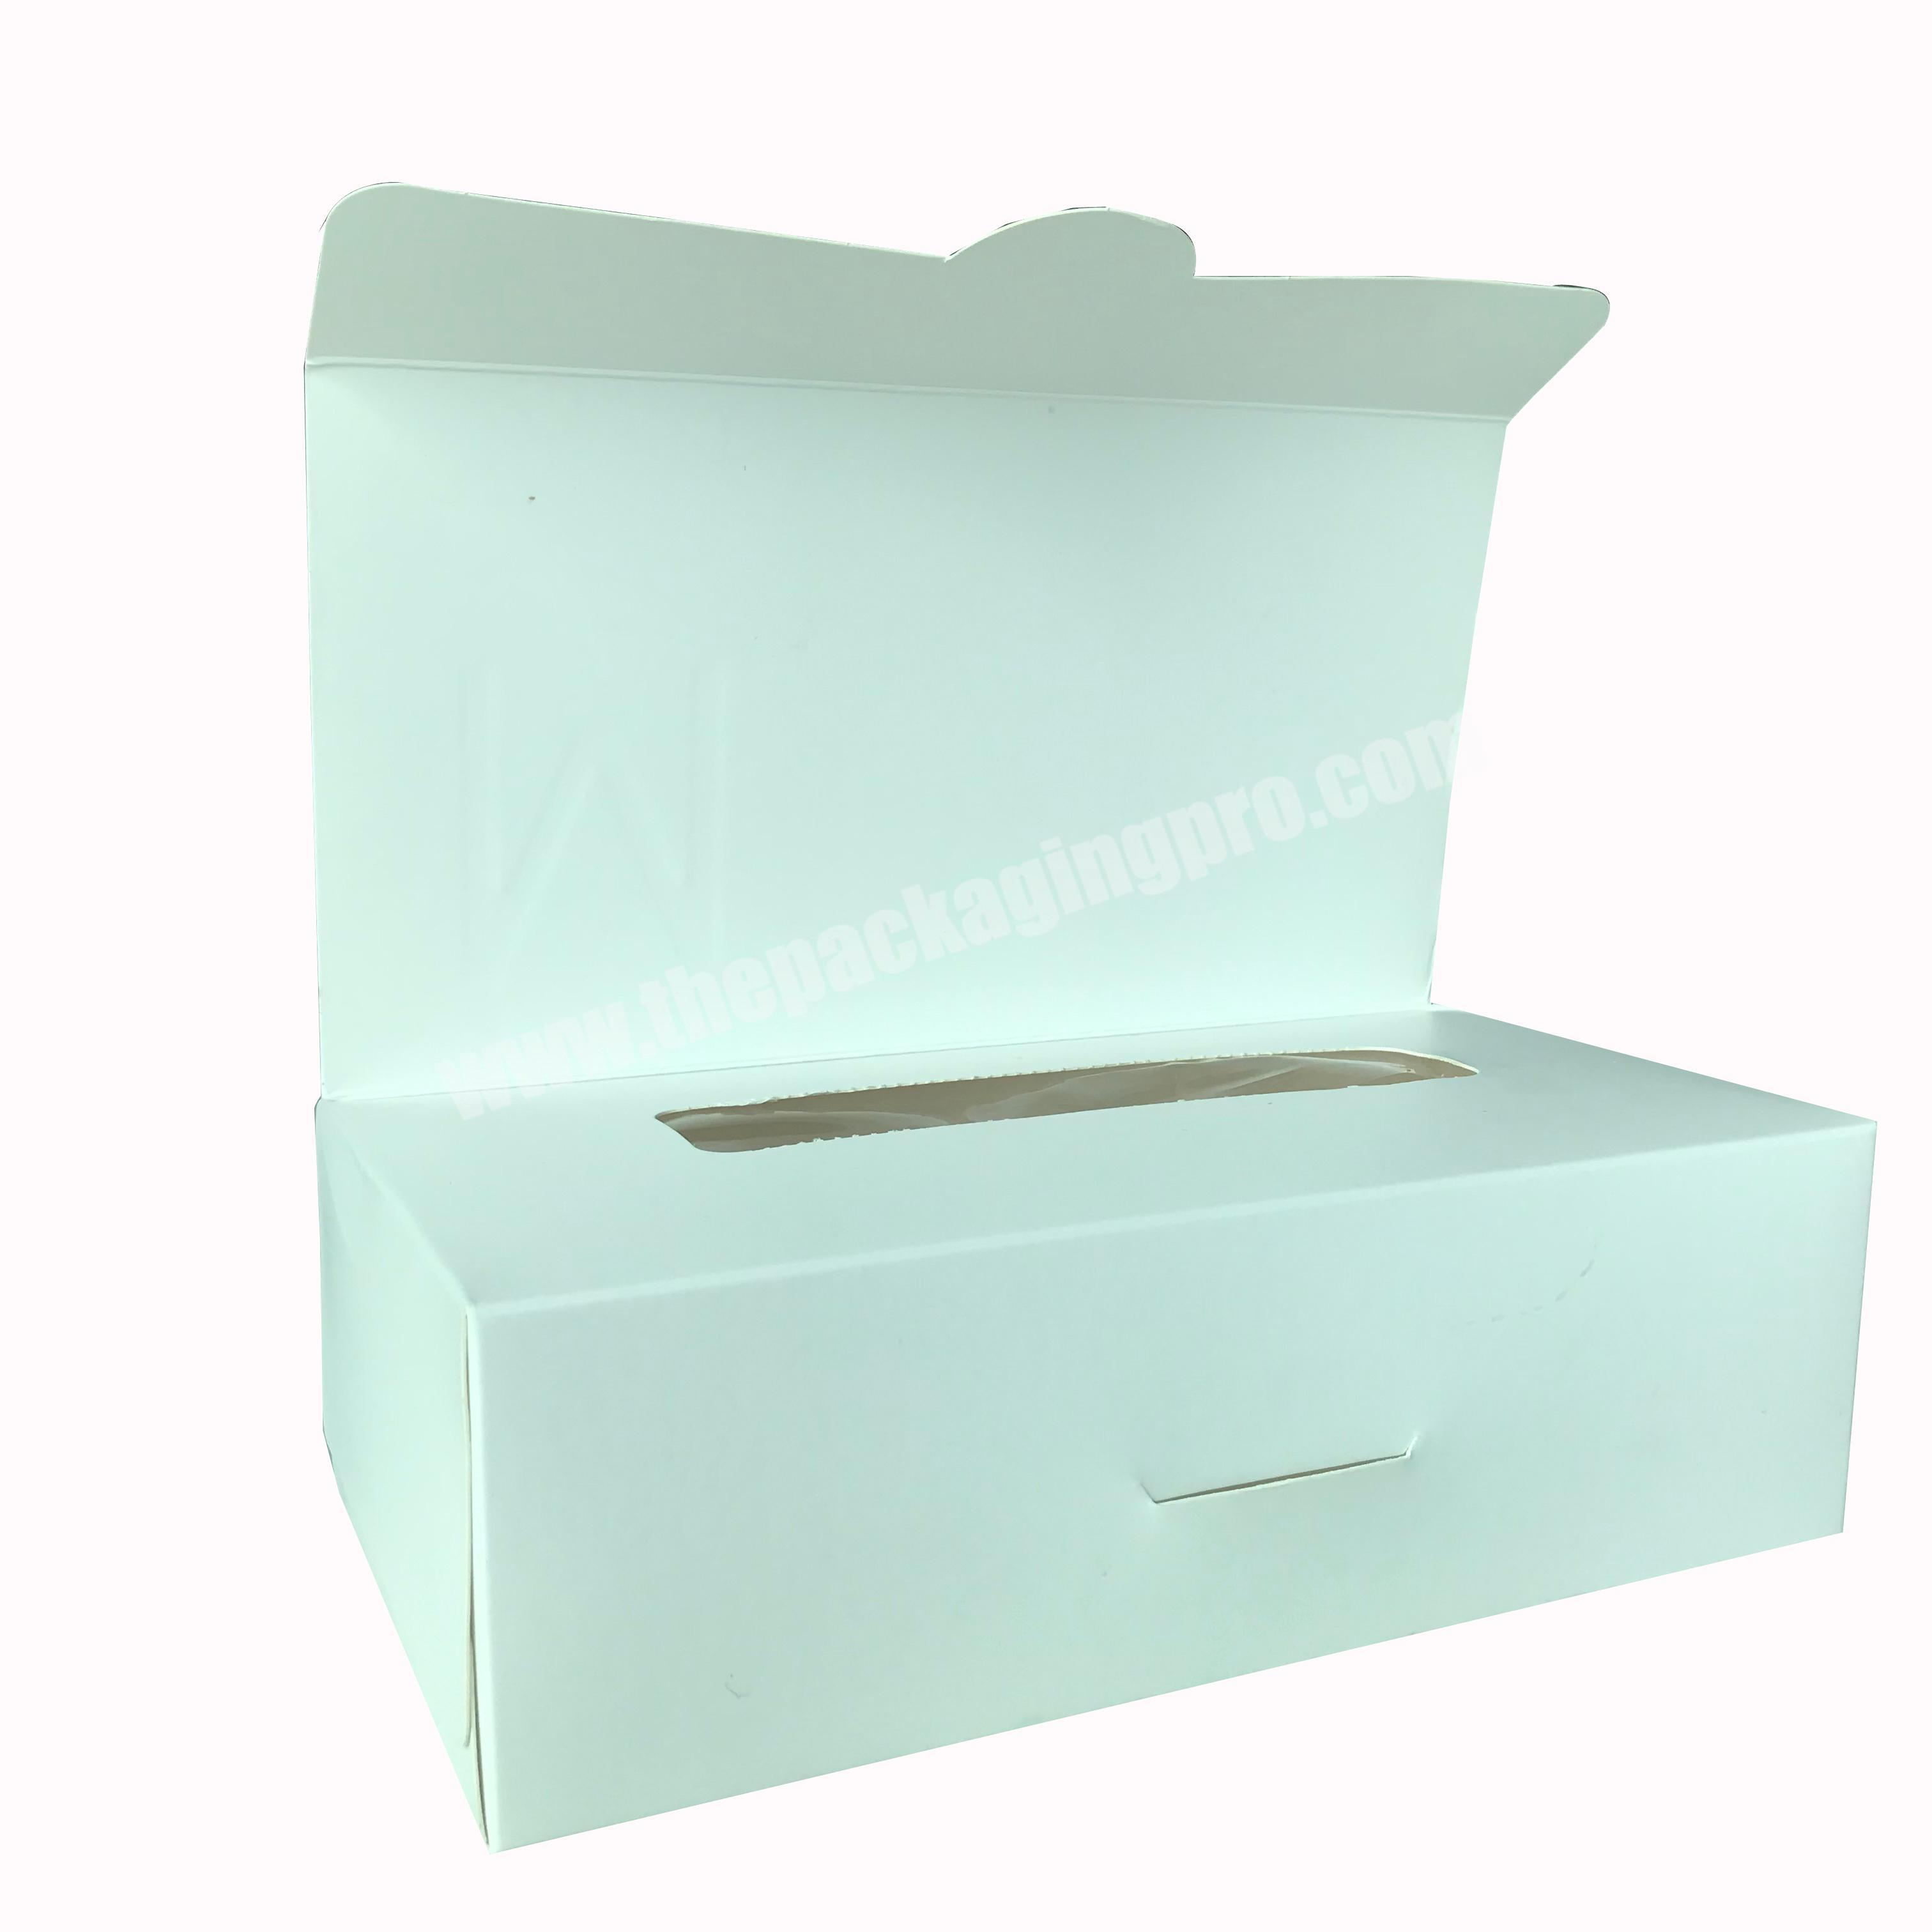 Luxury tissue box,Custom paper tissue box printing&packaging,Tissue packaging box manufacture